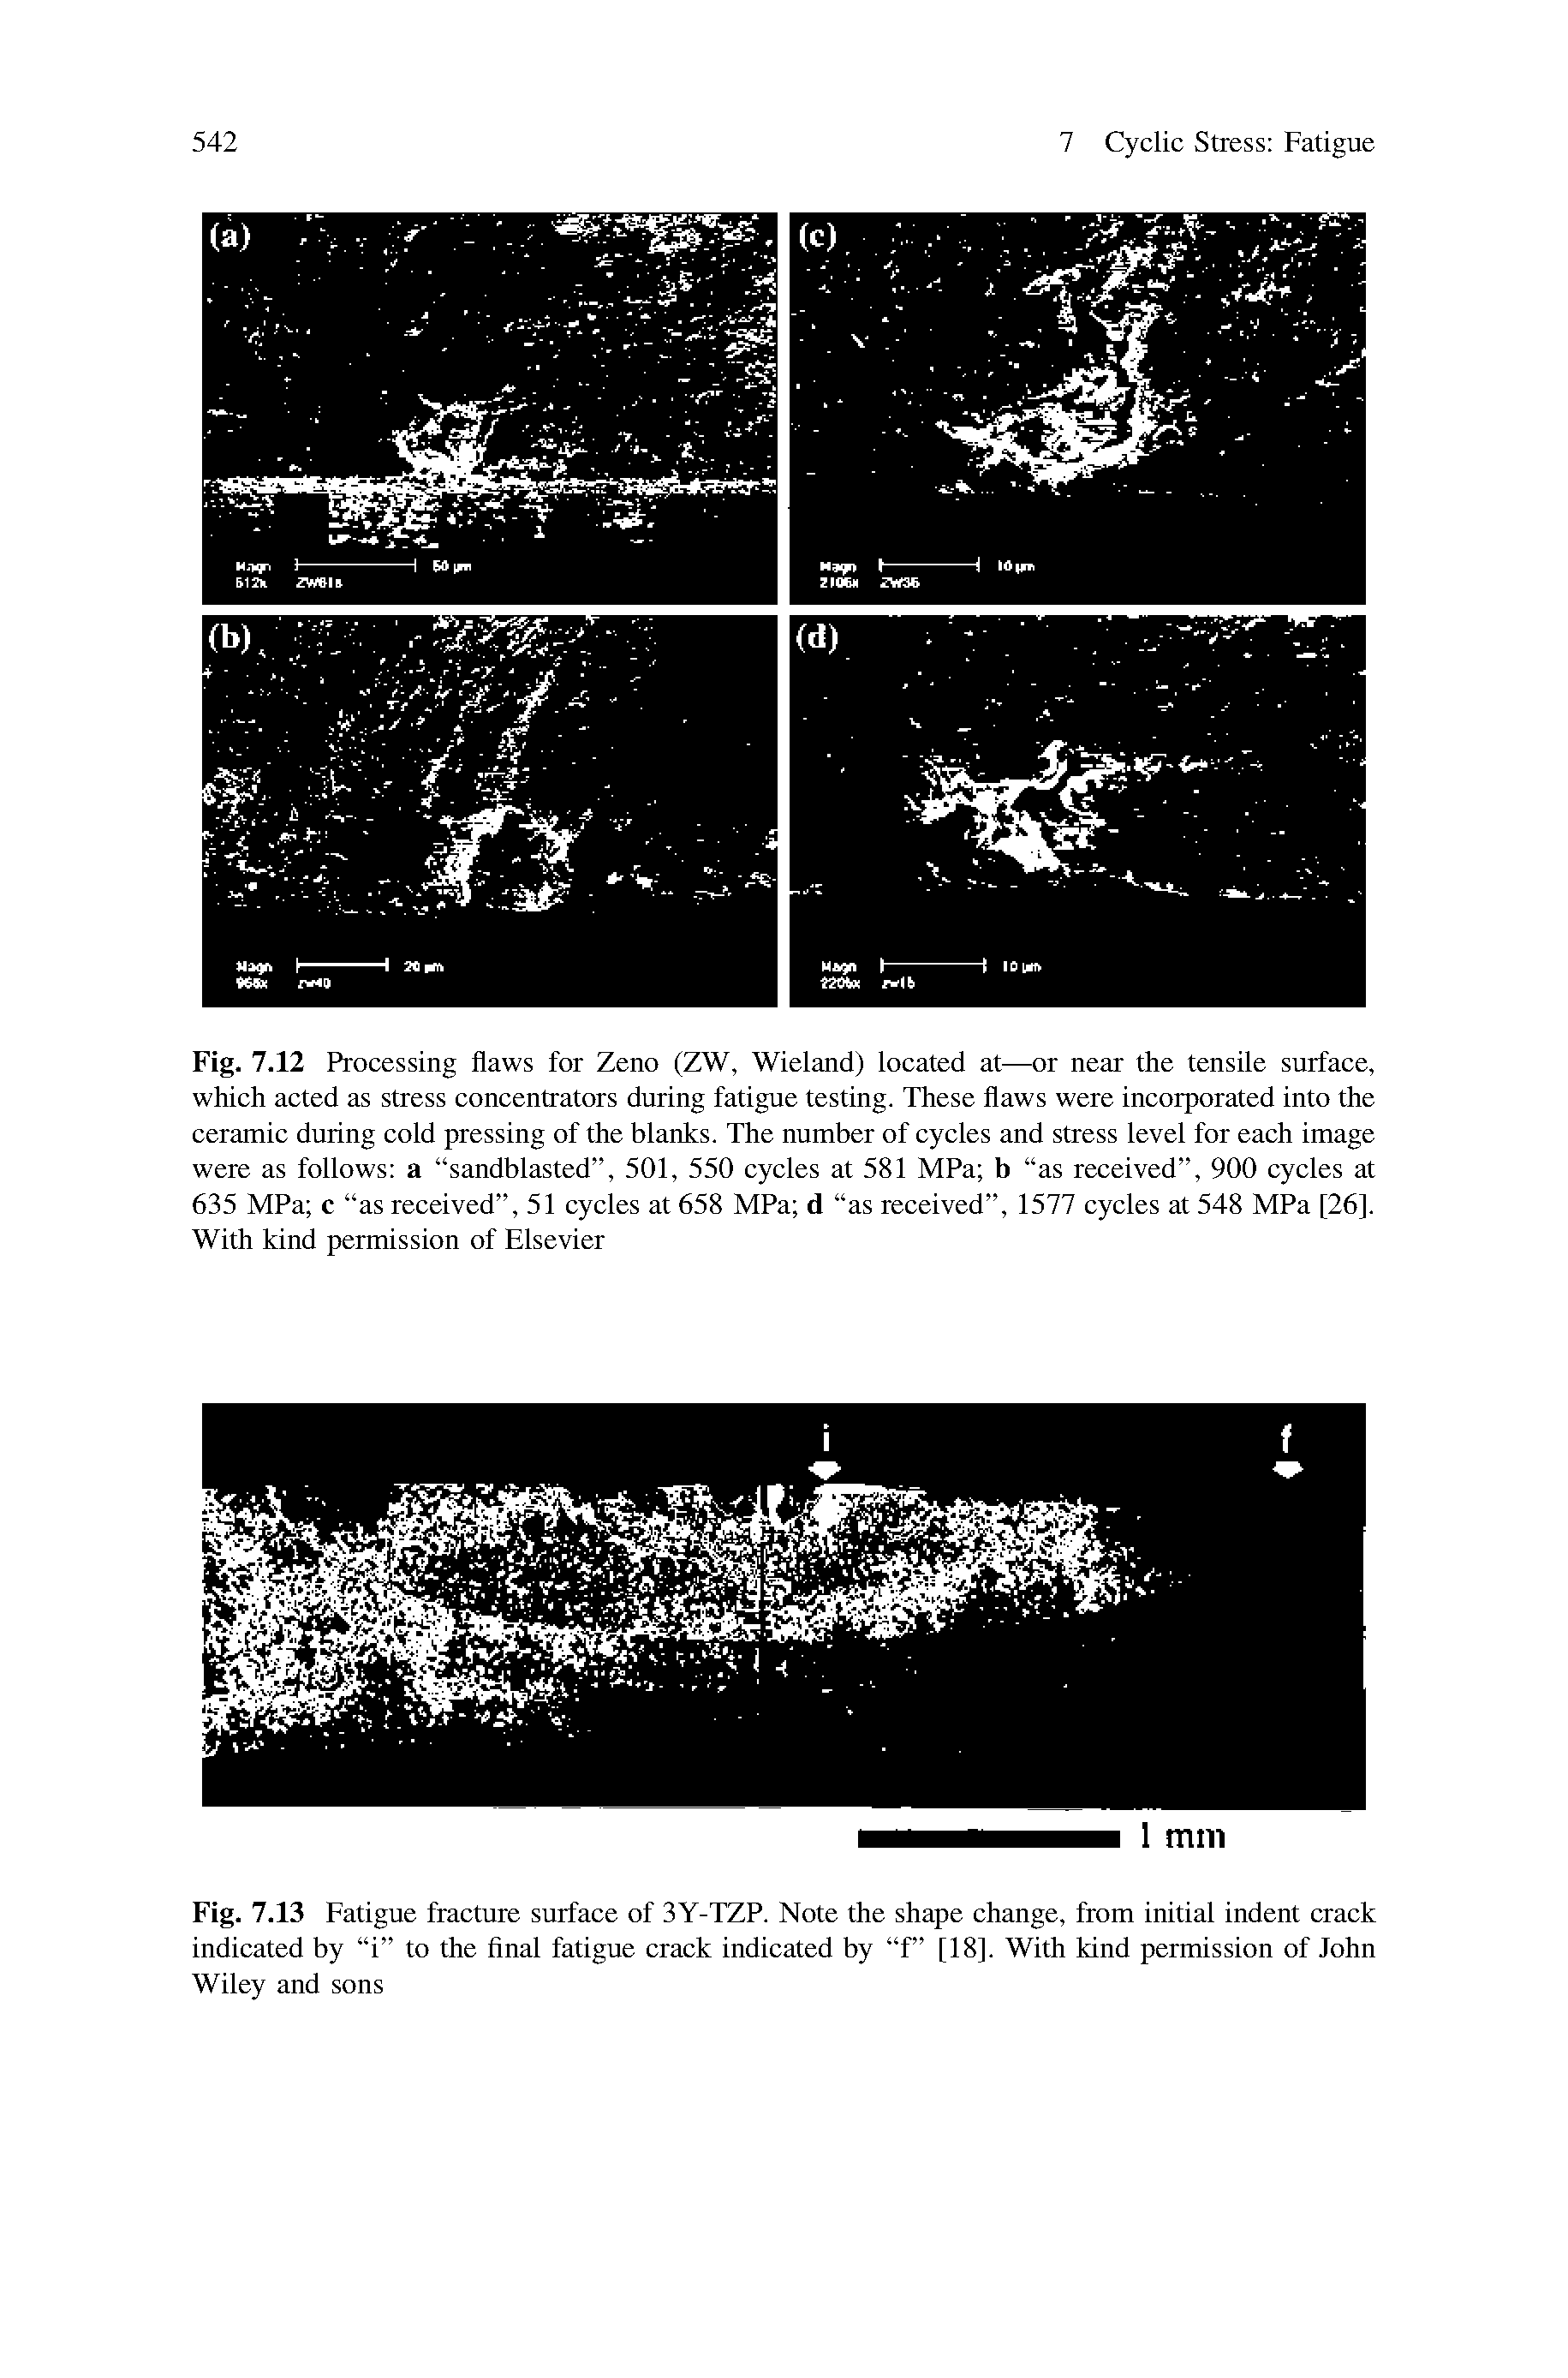 Fig. 7.12 Processing flaws for Zeno (ZW, Wieland) located at—or near the tensile surface, which acted as stress concentrators during fatigue testing. These flaws were incorporated into the ceramic during cold pressing of the blanks. The number of cycles and stress level for each image were as follows a sandblasted , 501, 550 cycles at 581 MPa b as received , 900 cycles at 635 MPa c as received , 51 cycles at 658 MPa d as received , 1577 cycles at 548 MPa [26]. With kind permission of Elsevier...